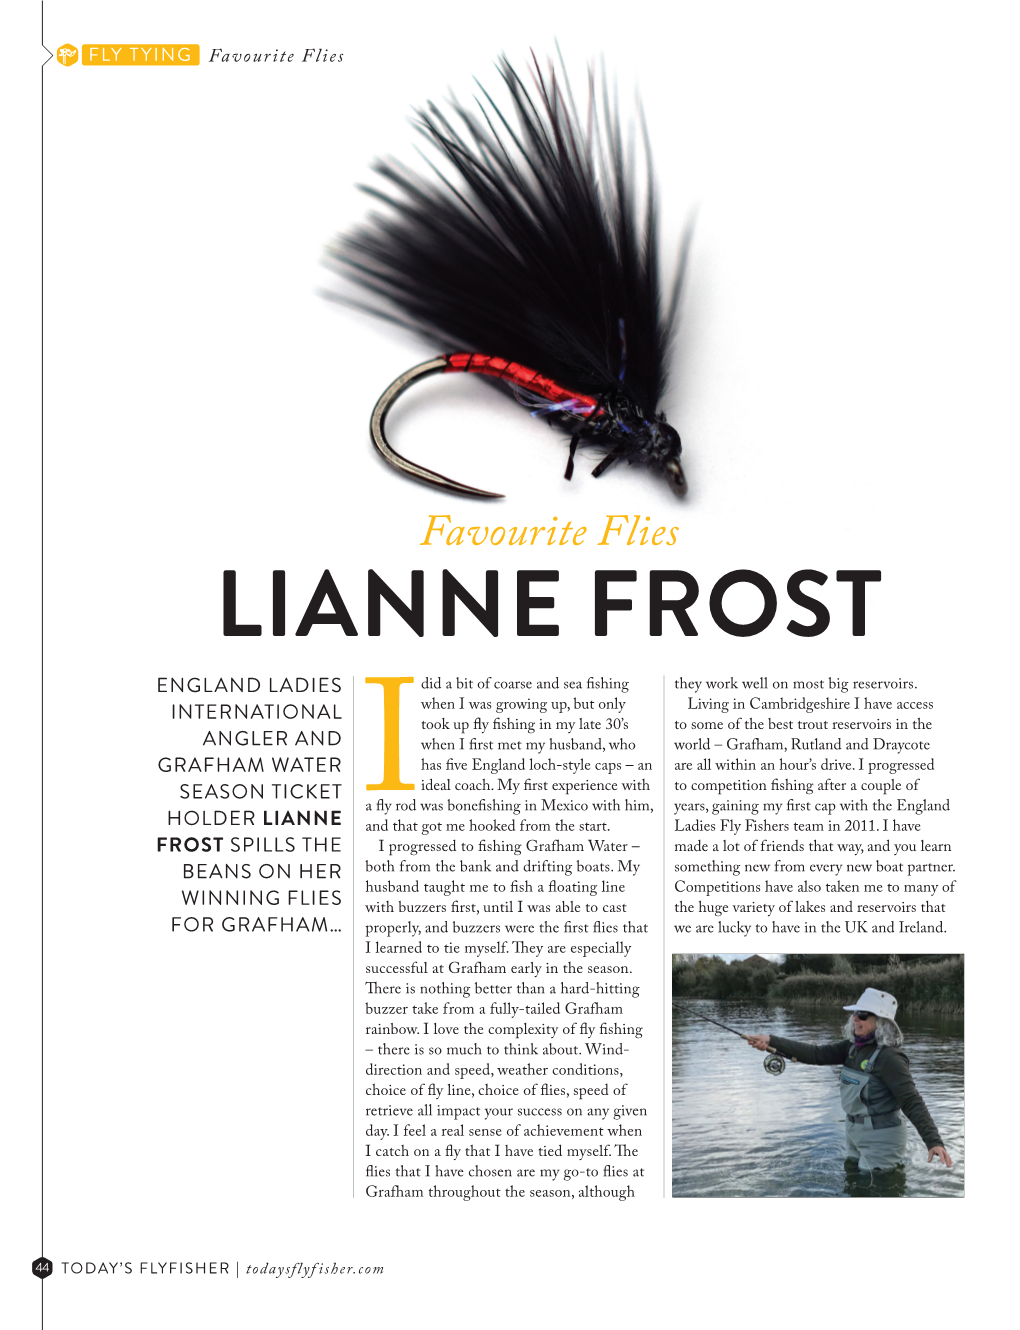 LIANNE FROST ENGLAND LADIES Did a Bit of Coarse and Sea Fishing They Work Well on Most Big Reservoirs